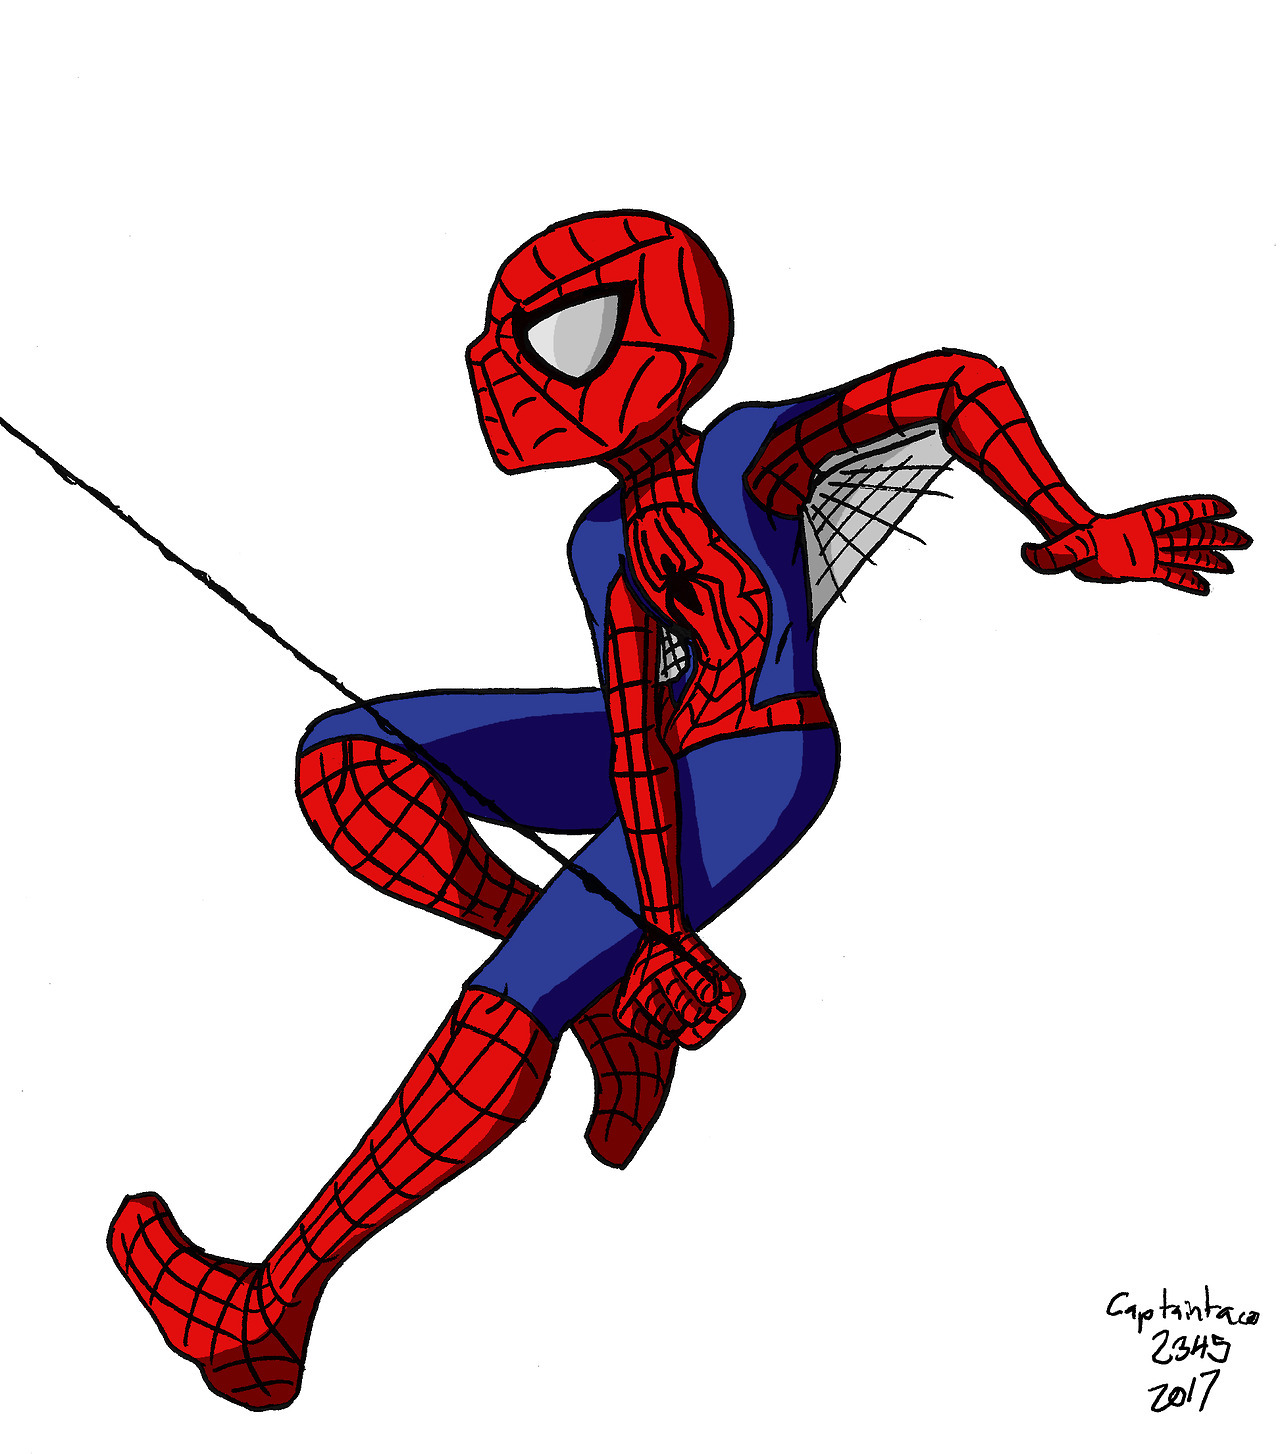 A drawing I did of my favourite Marvel Super Hero, Spiderman. I did two versions,